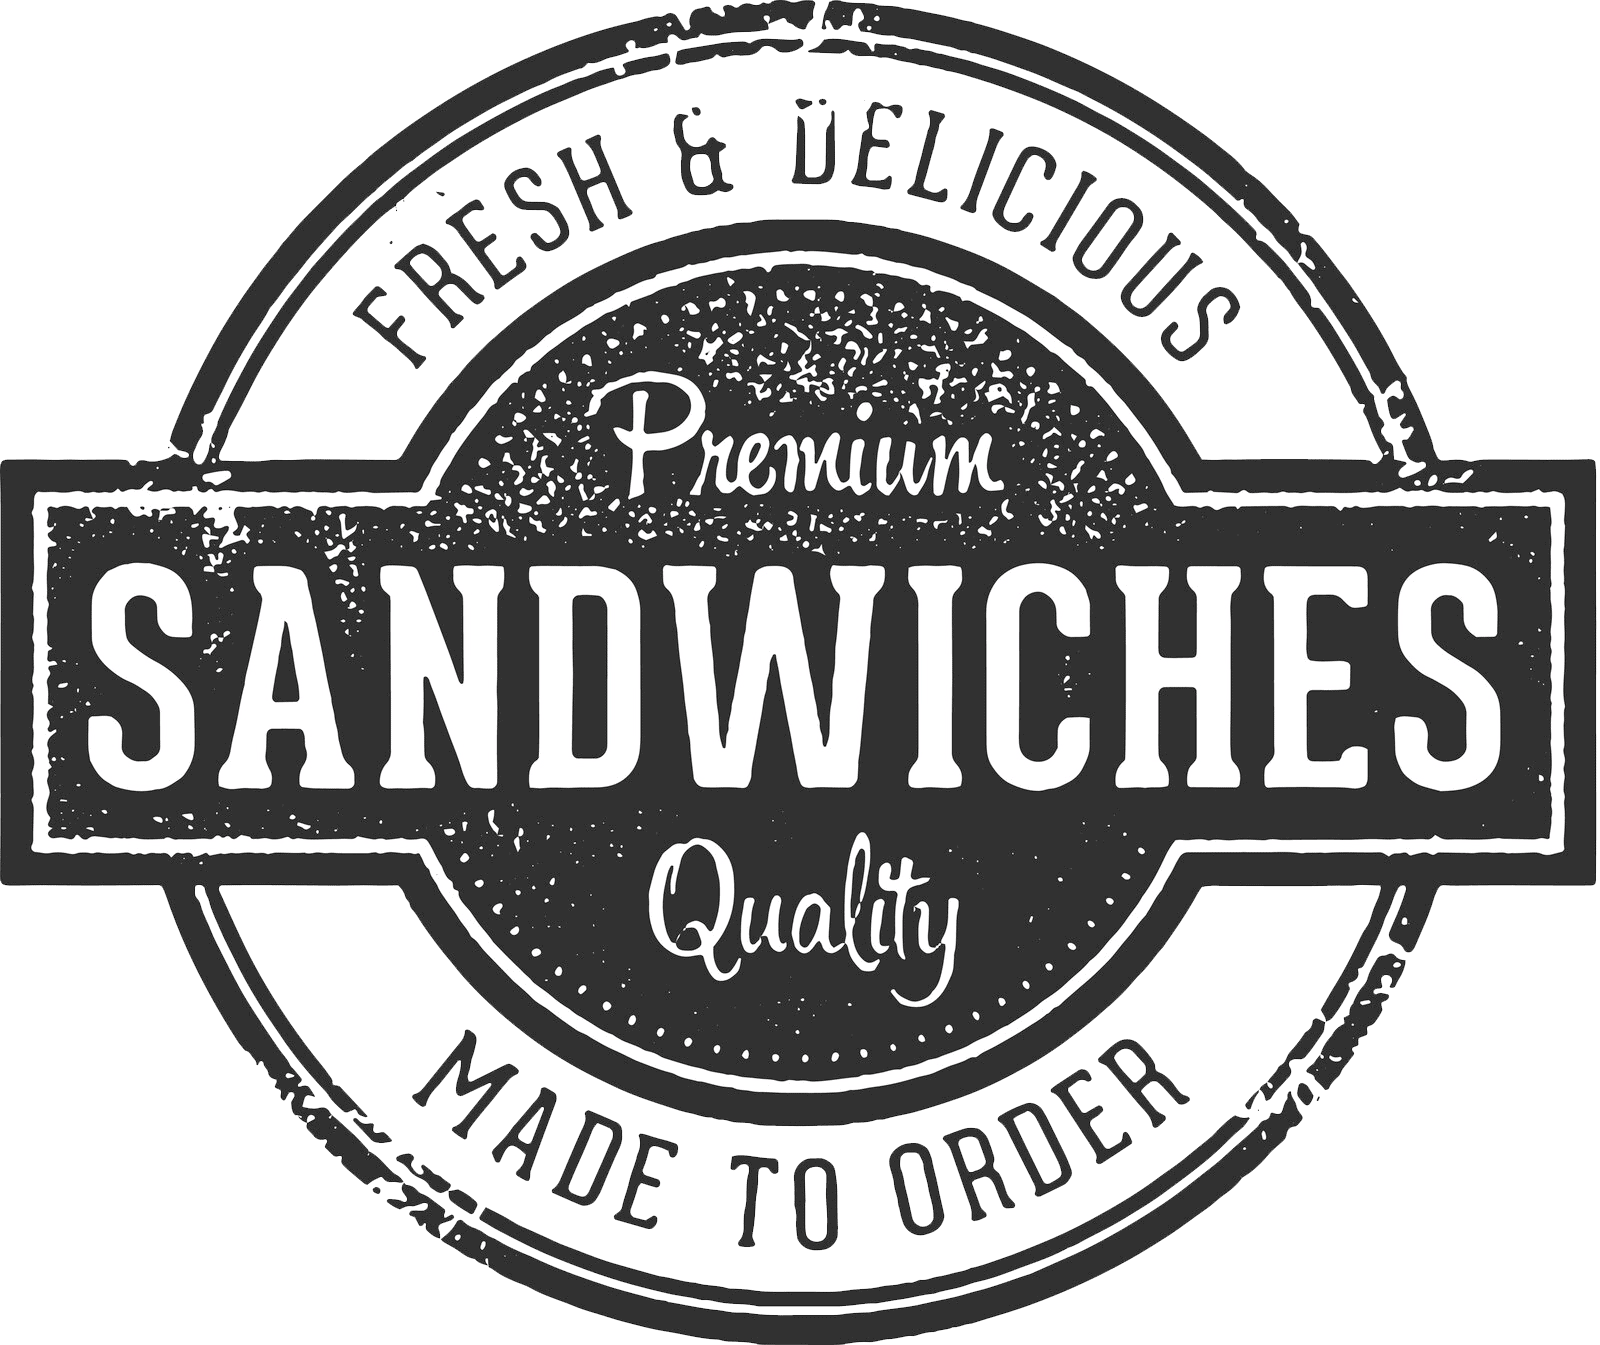 Sandwich Made to Order